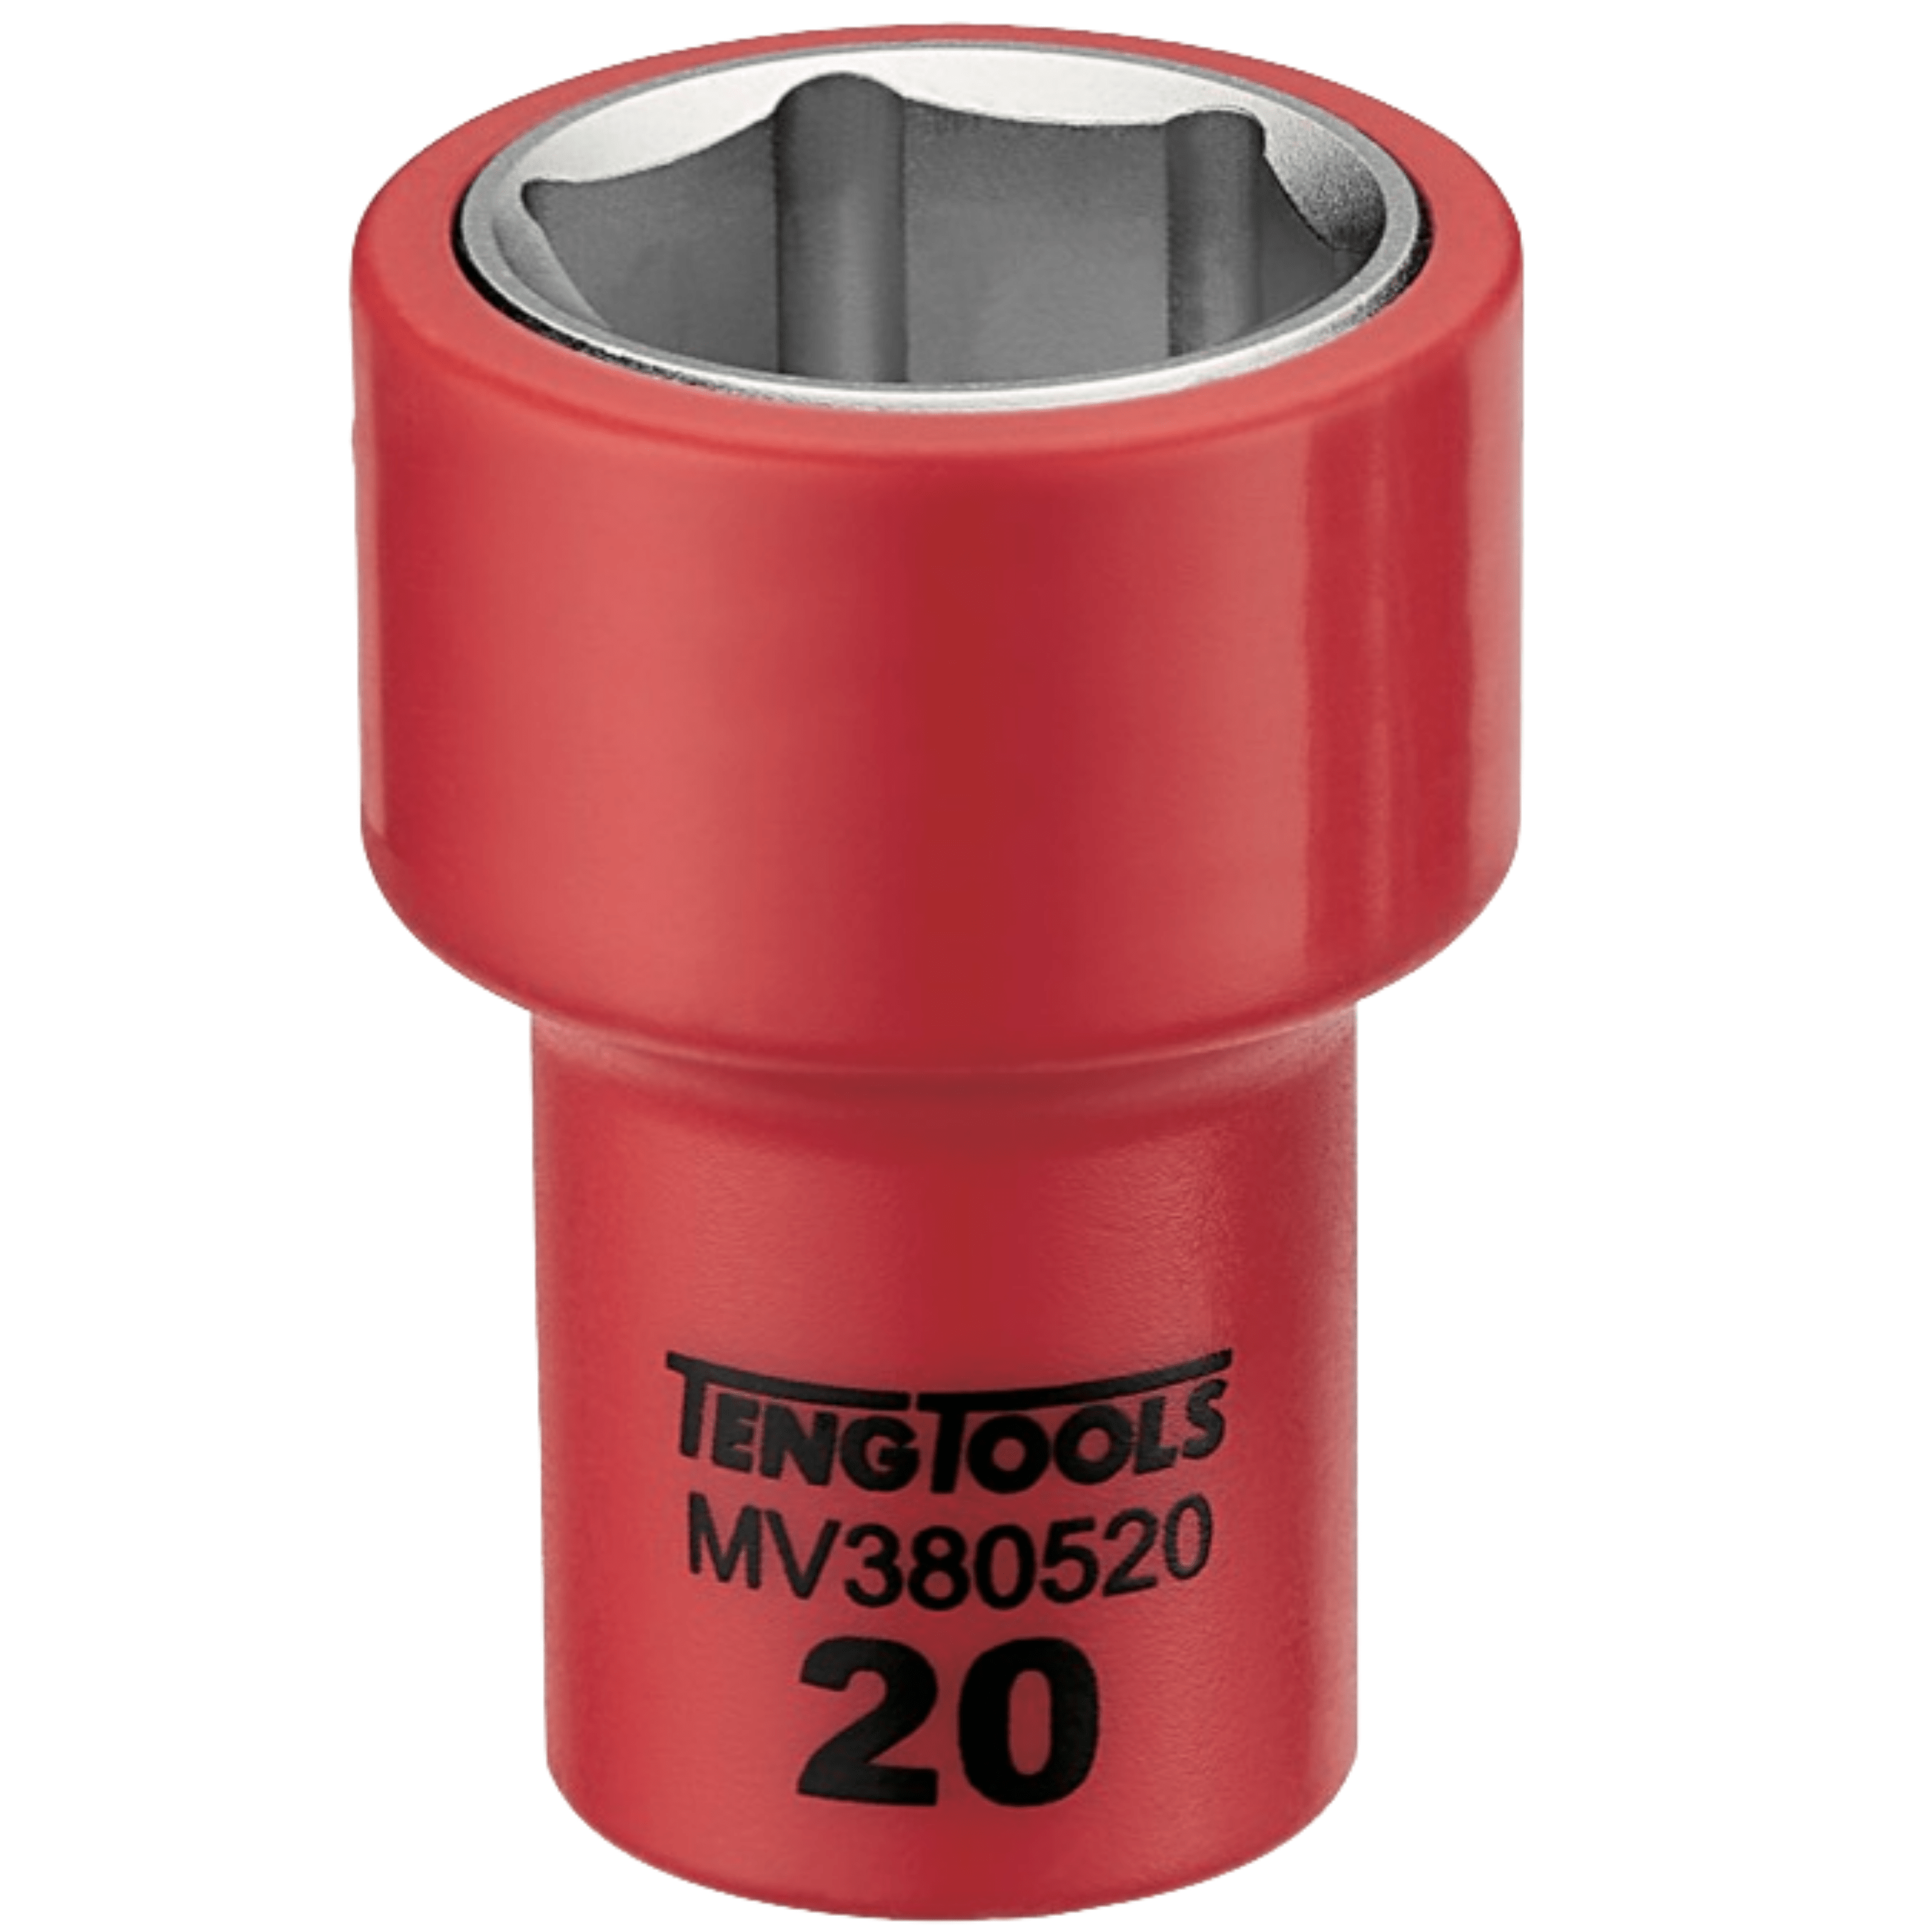 Teng Tools 3/8 Inch Drive Metric 6 Point 1000 Volt Shallow Insulated Sockets - 20mm